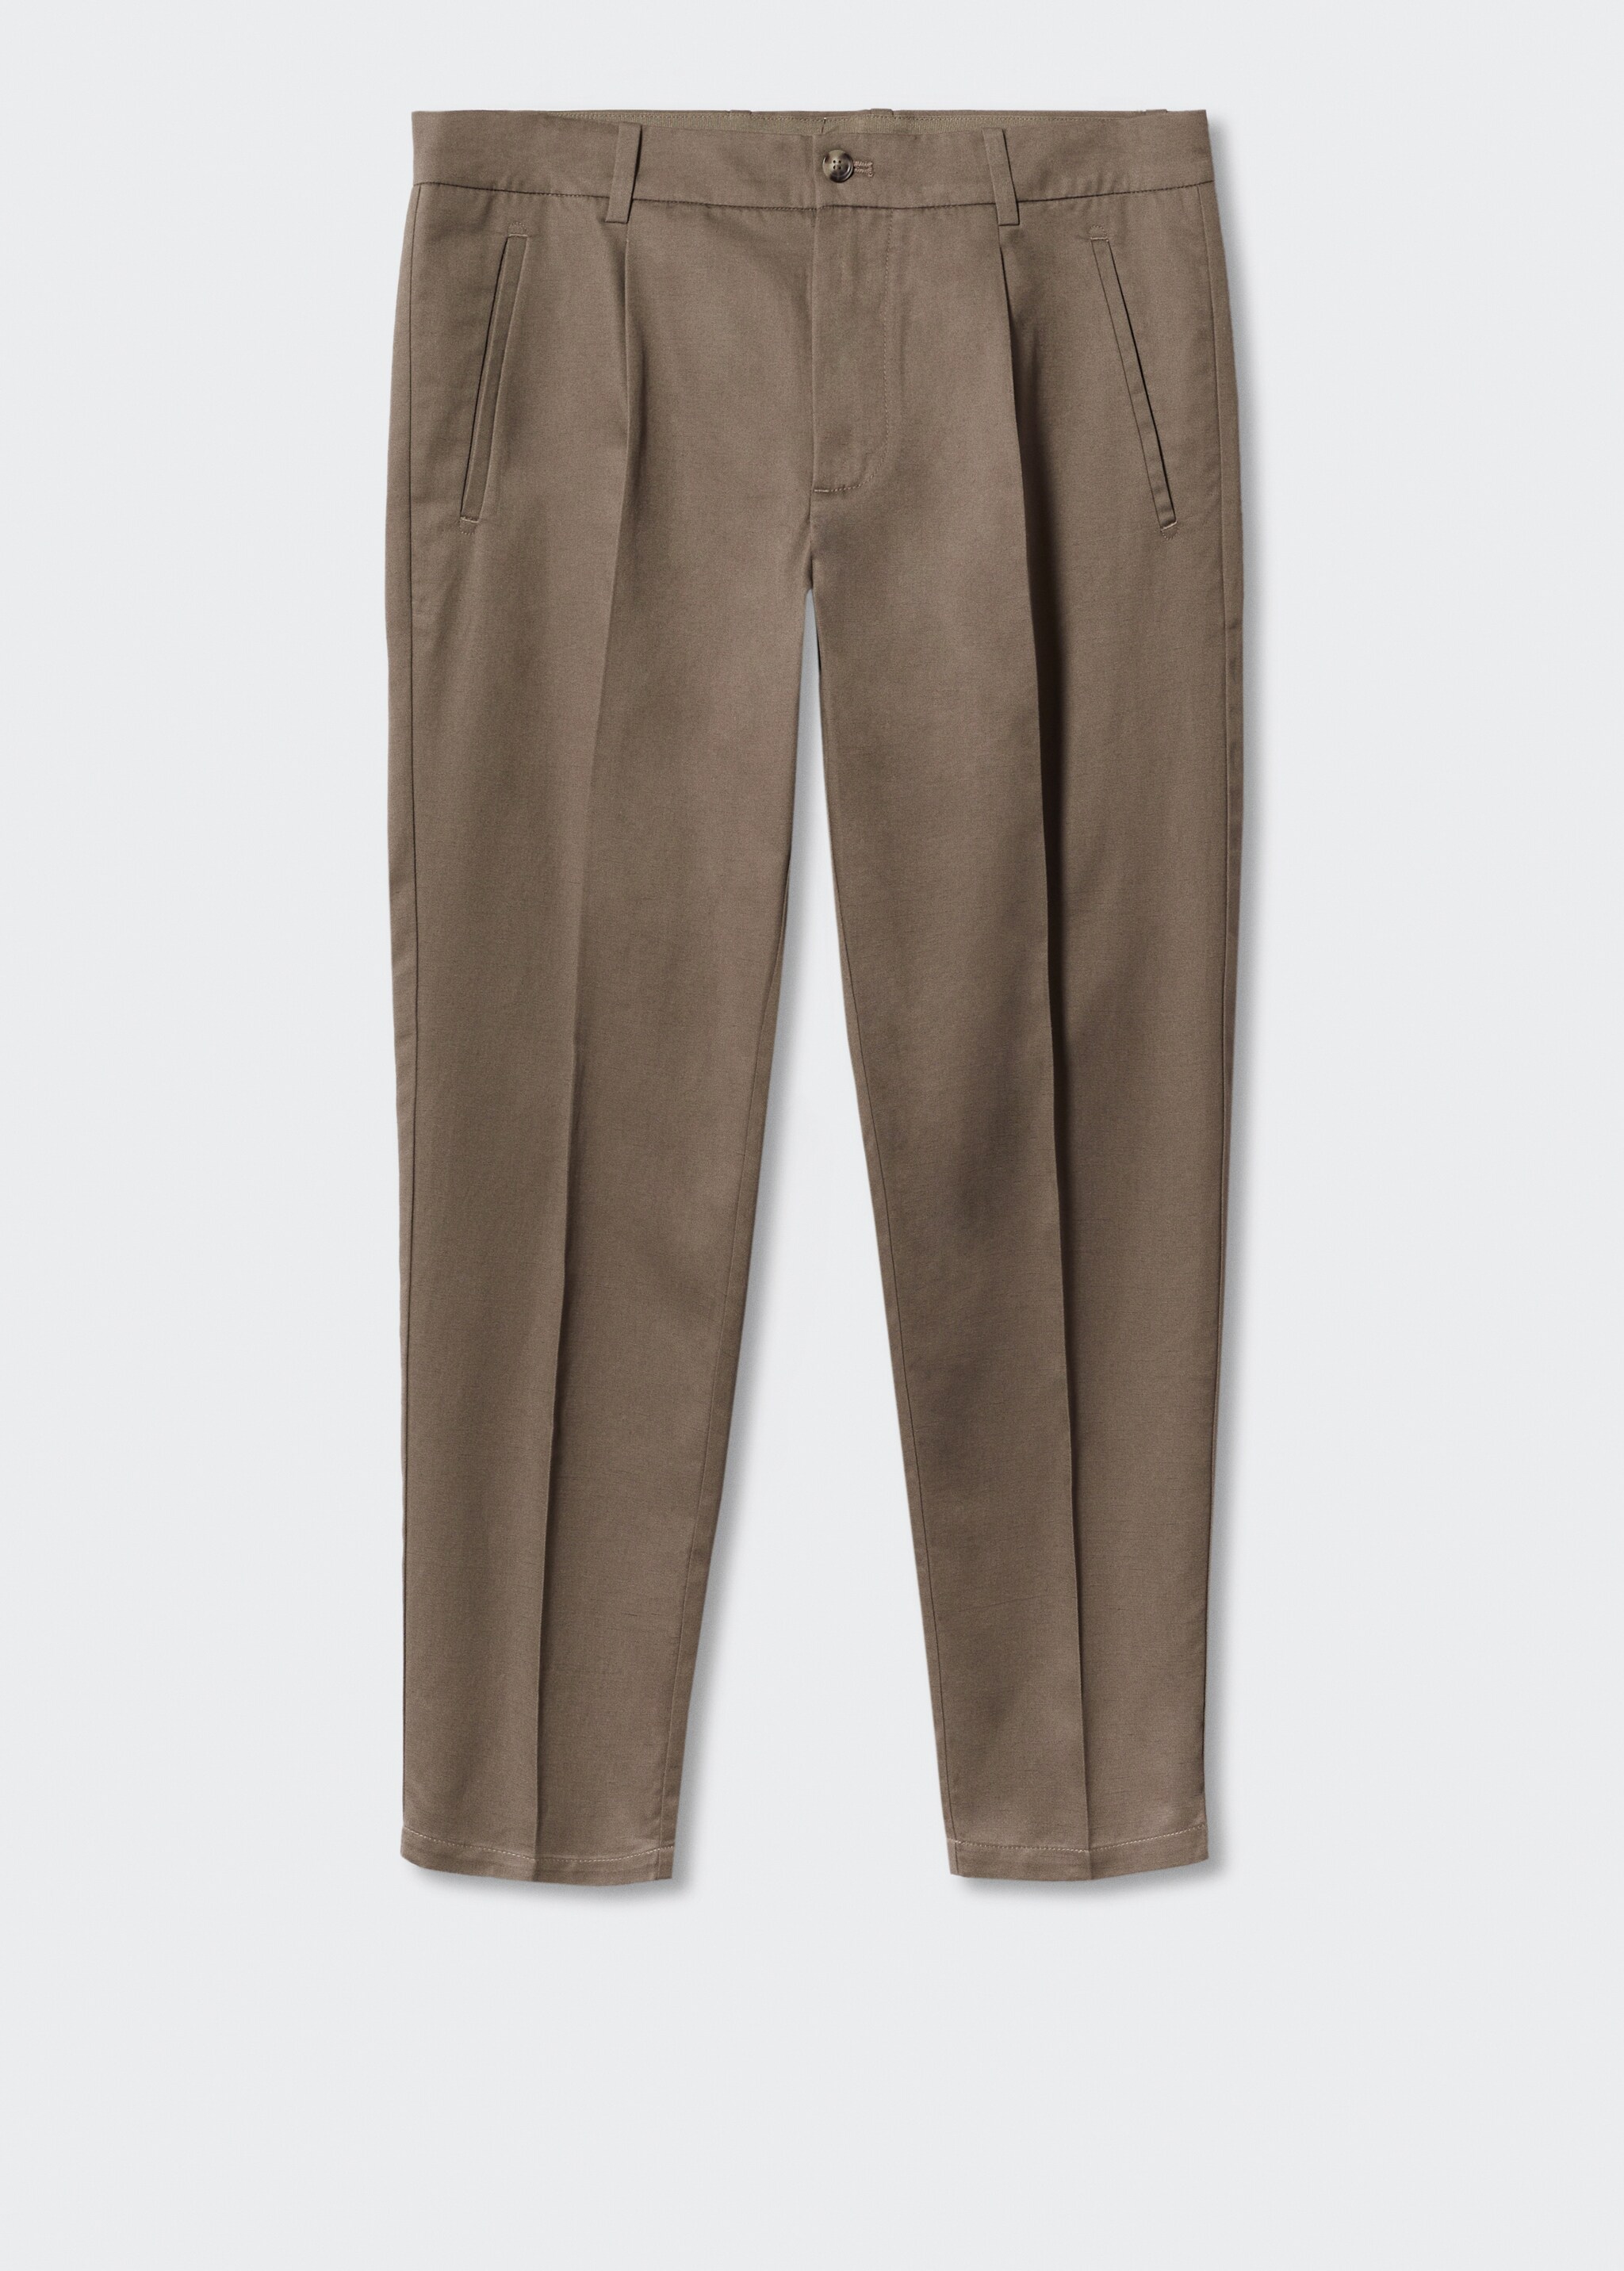 Cotton linen suit trousers with pleats - Article without model